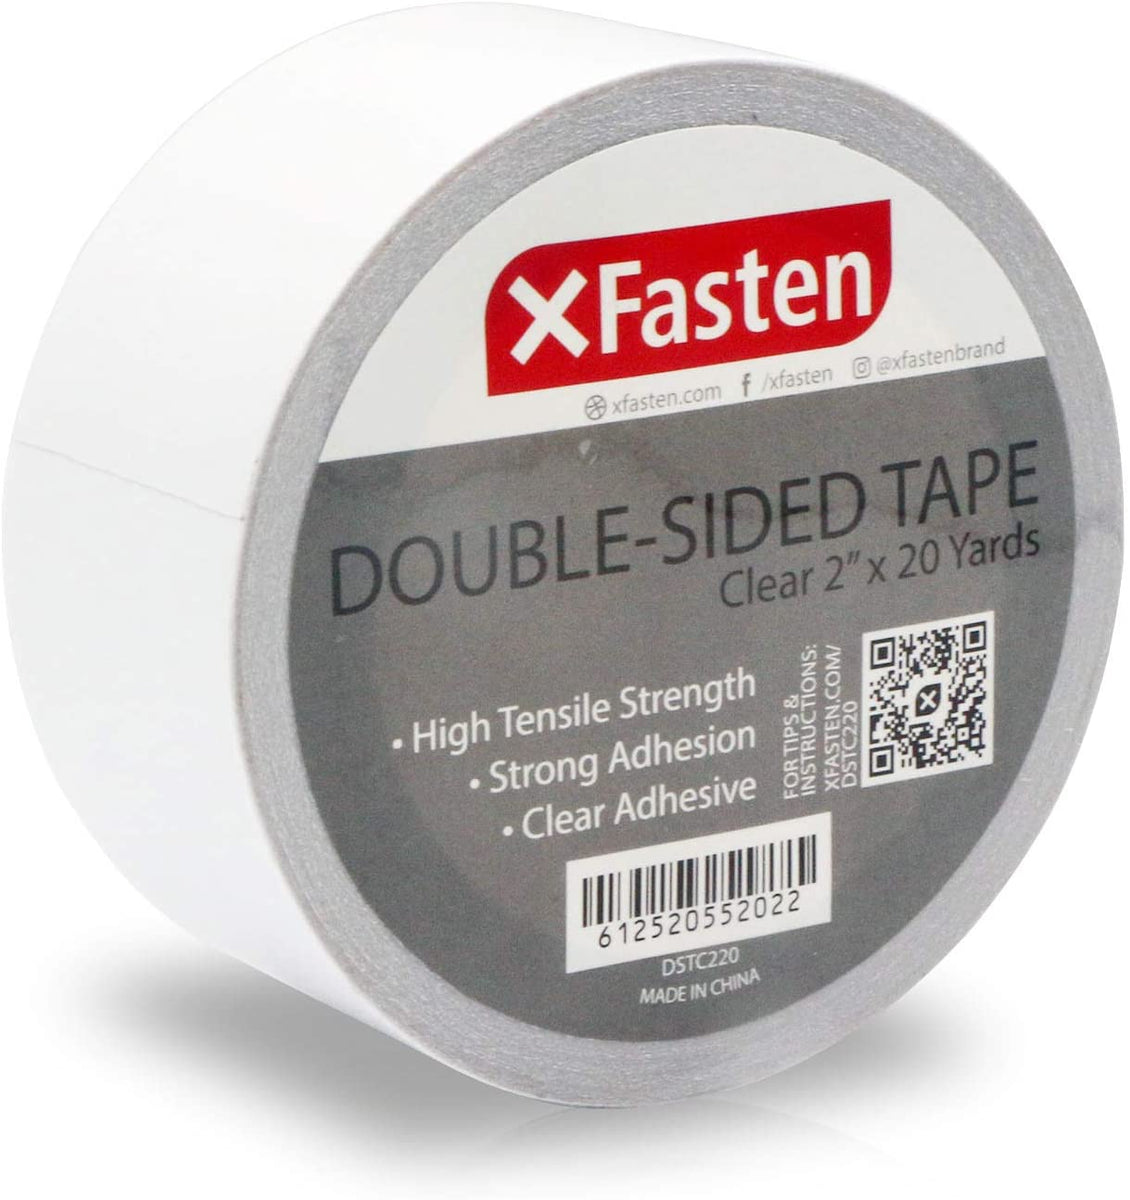 XFasten Double Sided Tape Carpet Tape, 2 Inches x 20 Yards